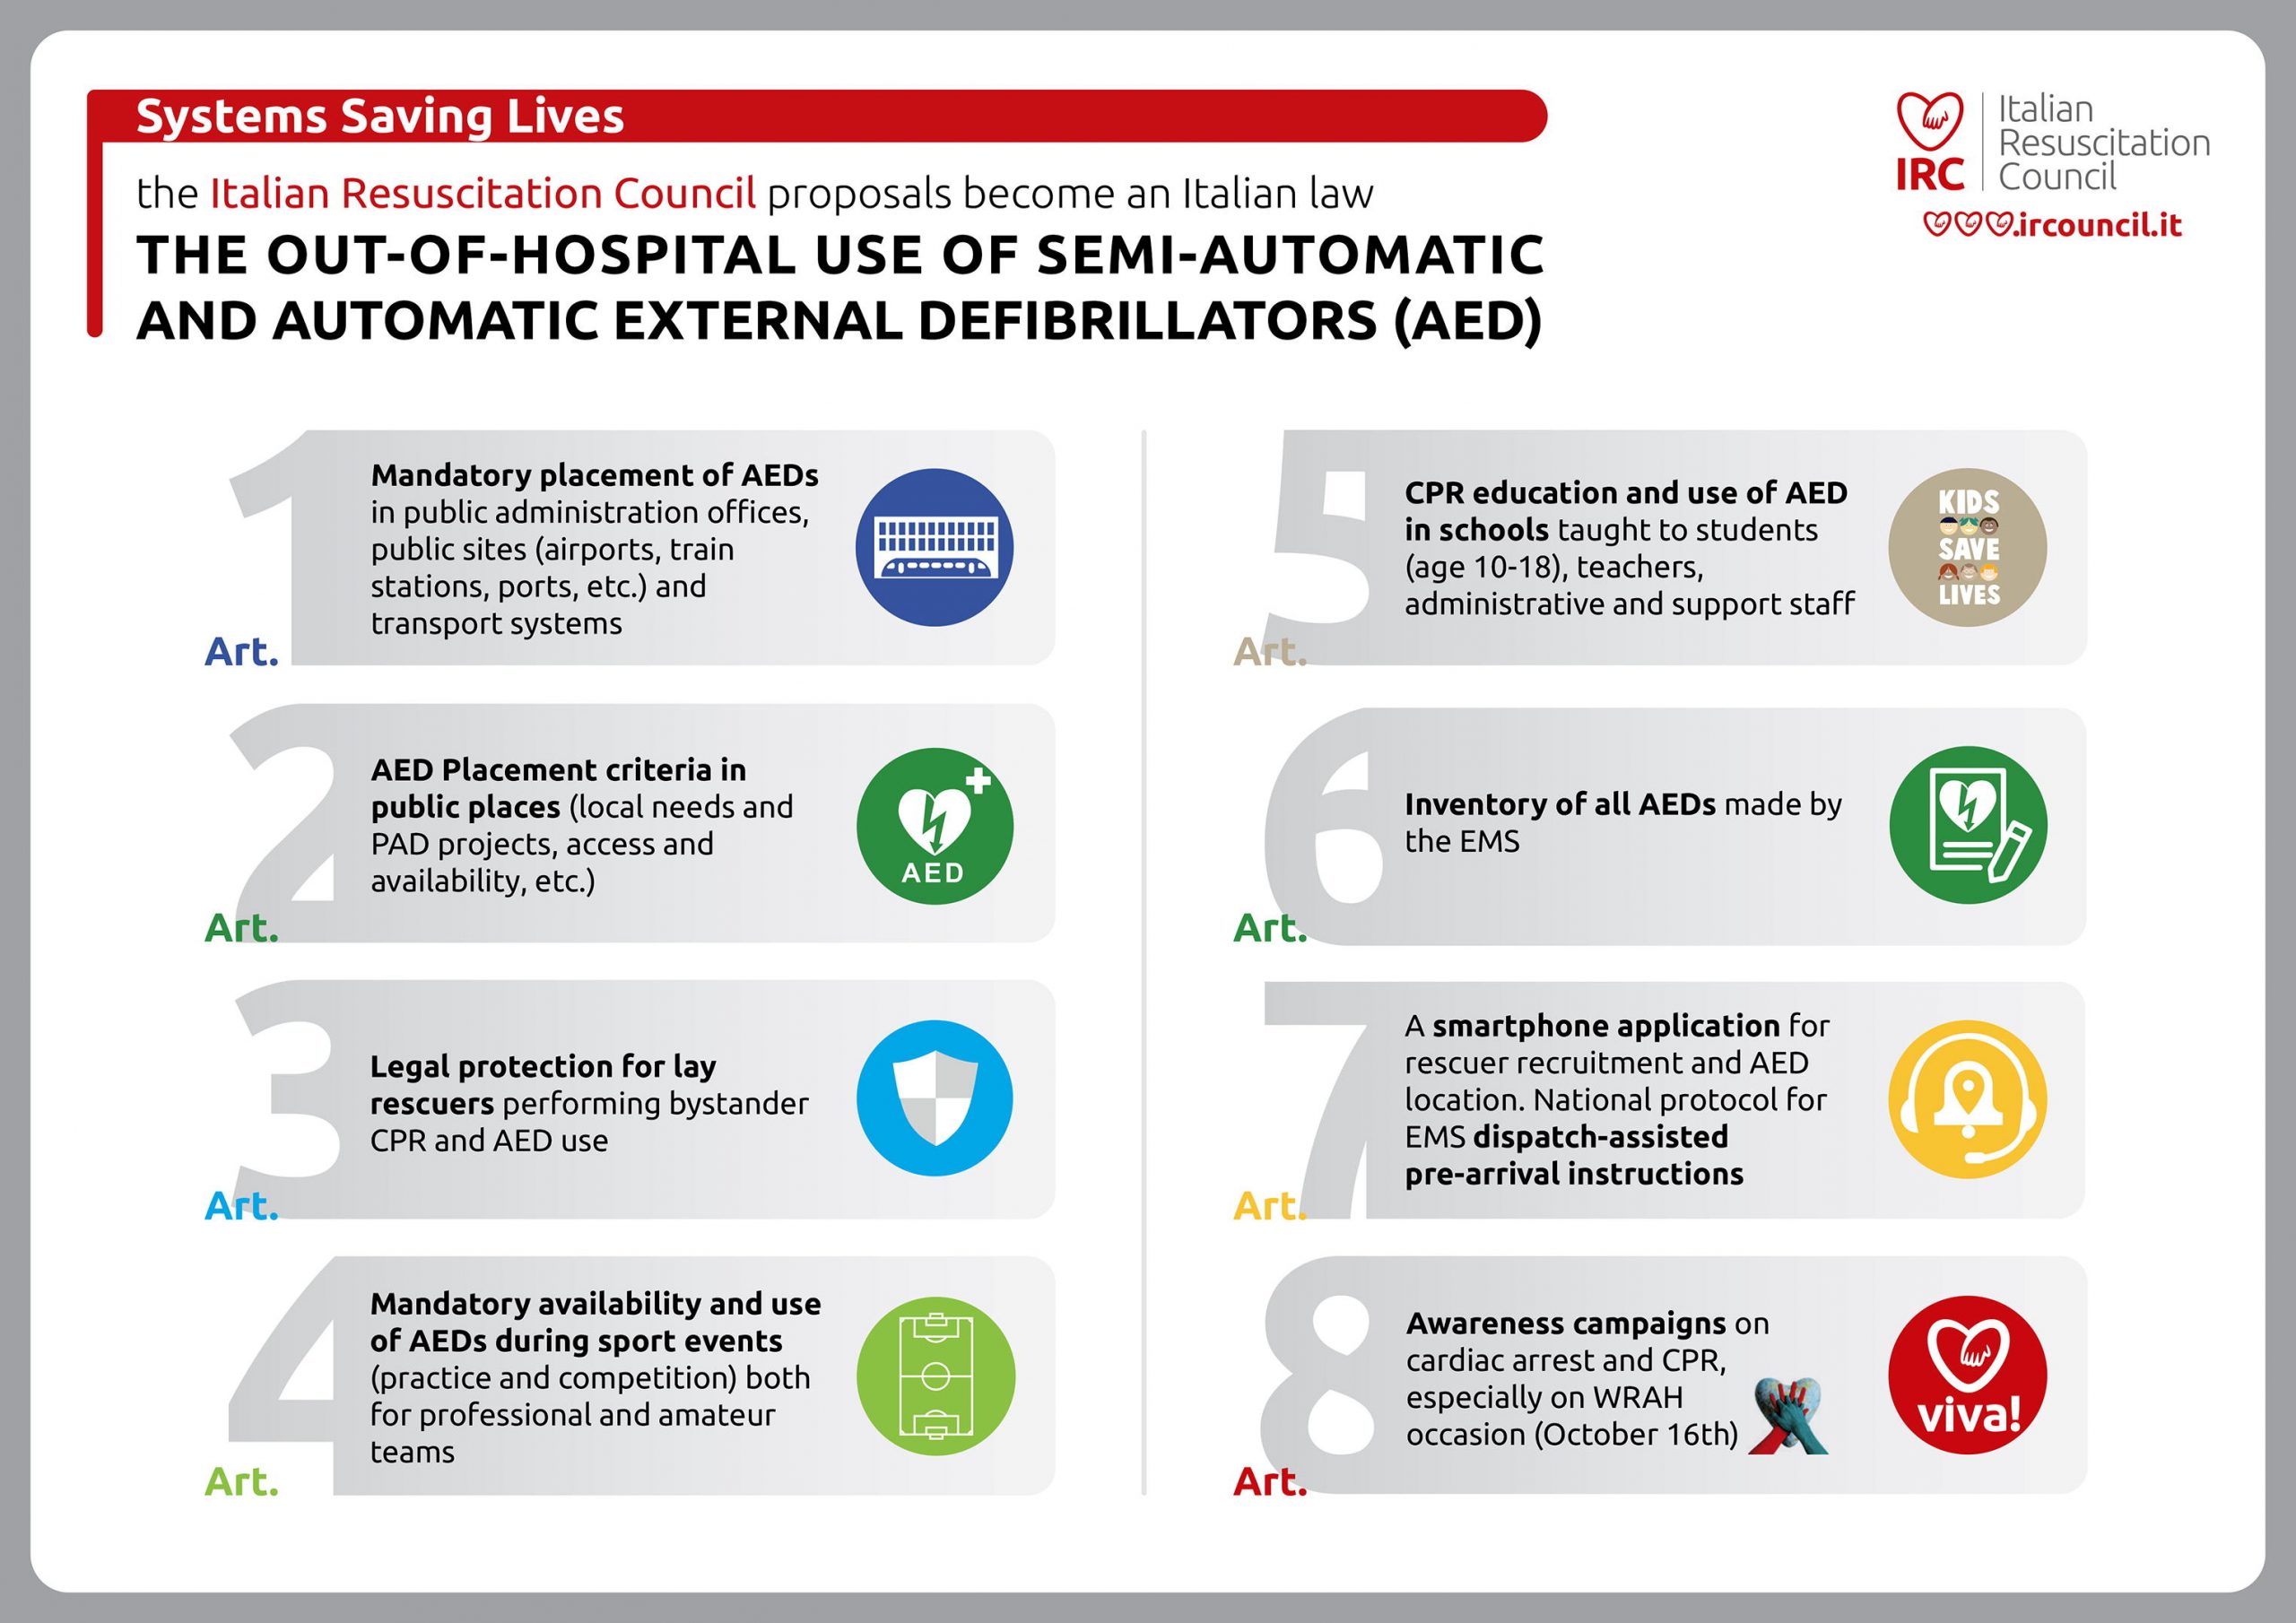 The eight key elements of Italy’s new AED laws for responding to out-of-hospital cardiac arrest.